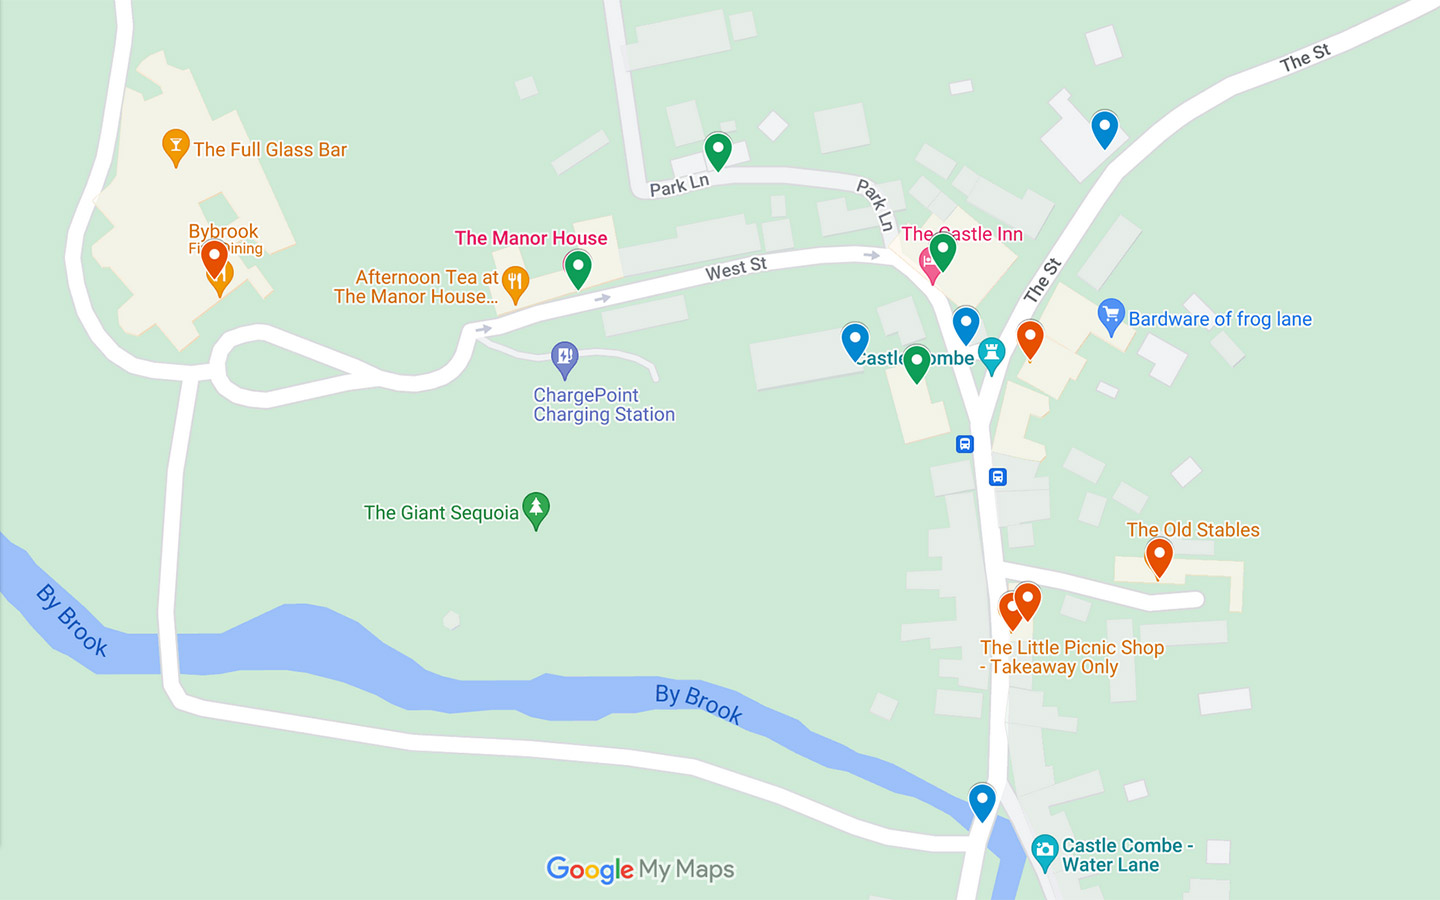 Map of things to do in Castle Combe